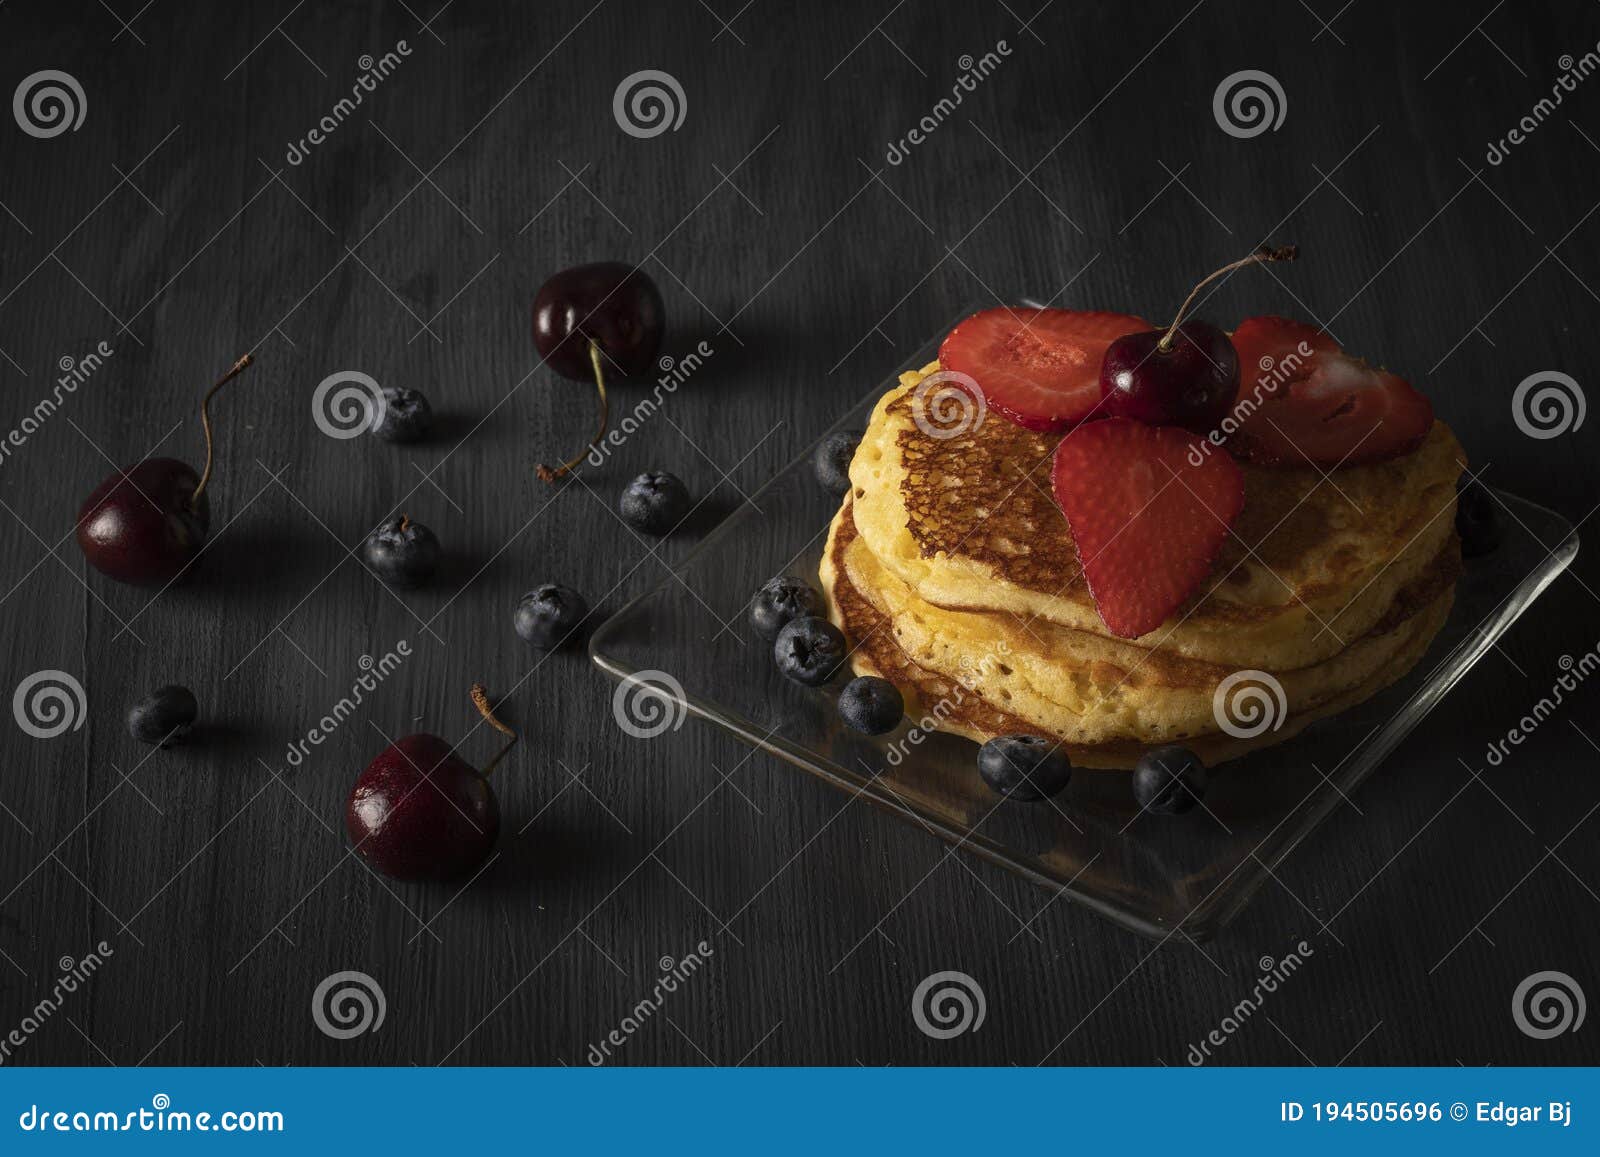 hot cakes stacked with cherries, strawberries and blueberries